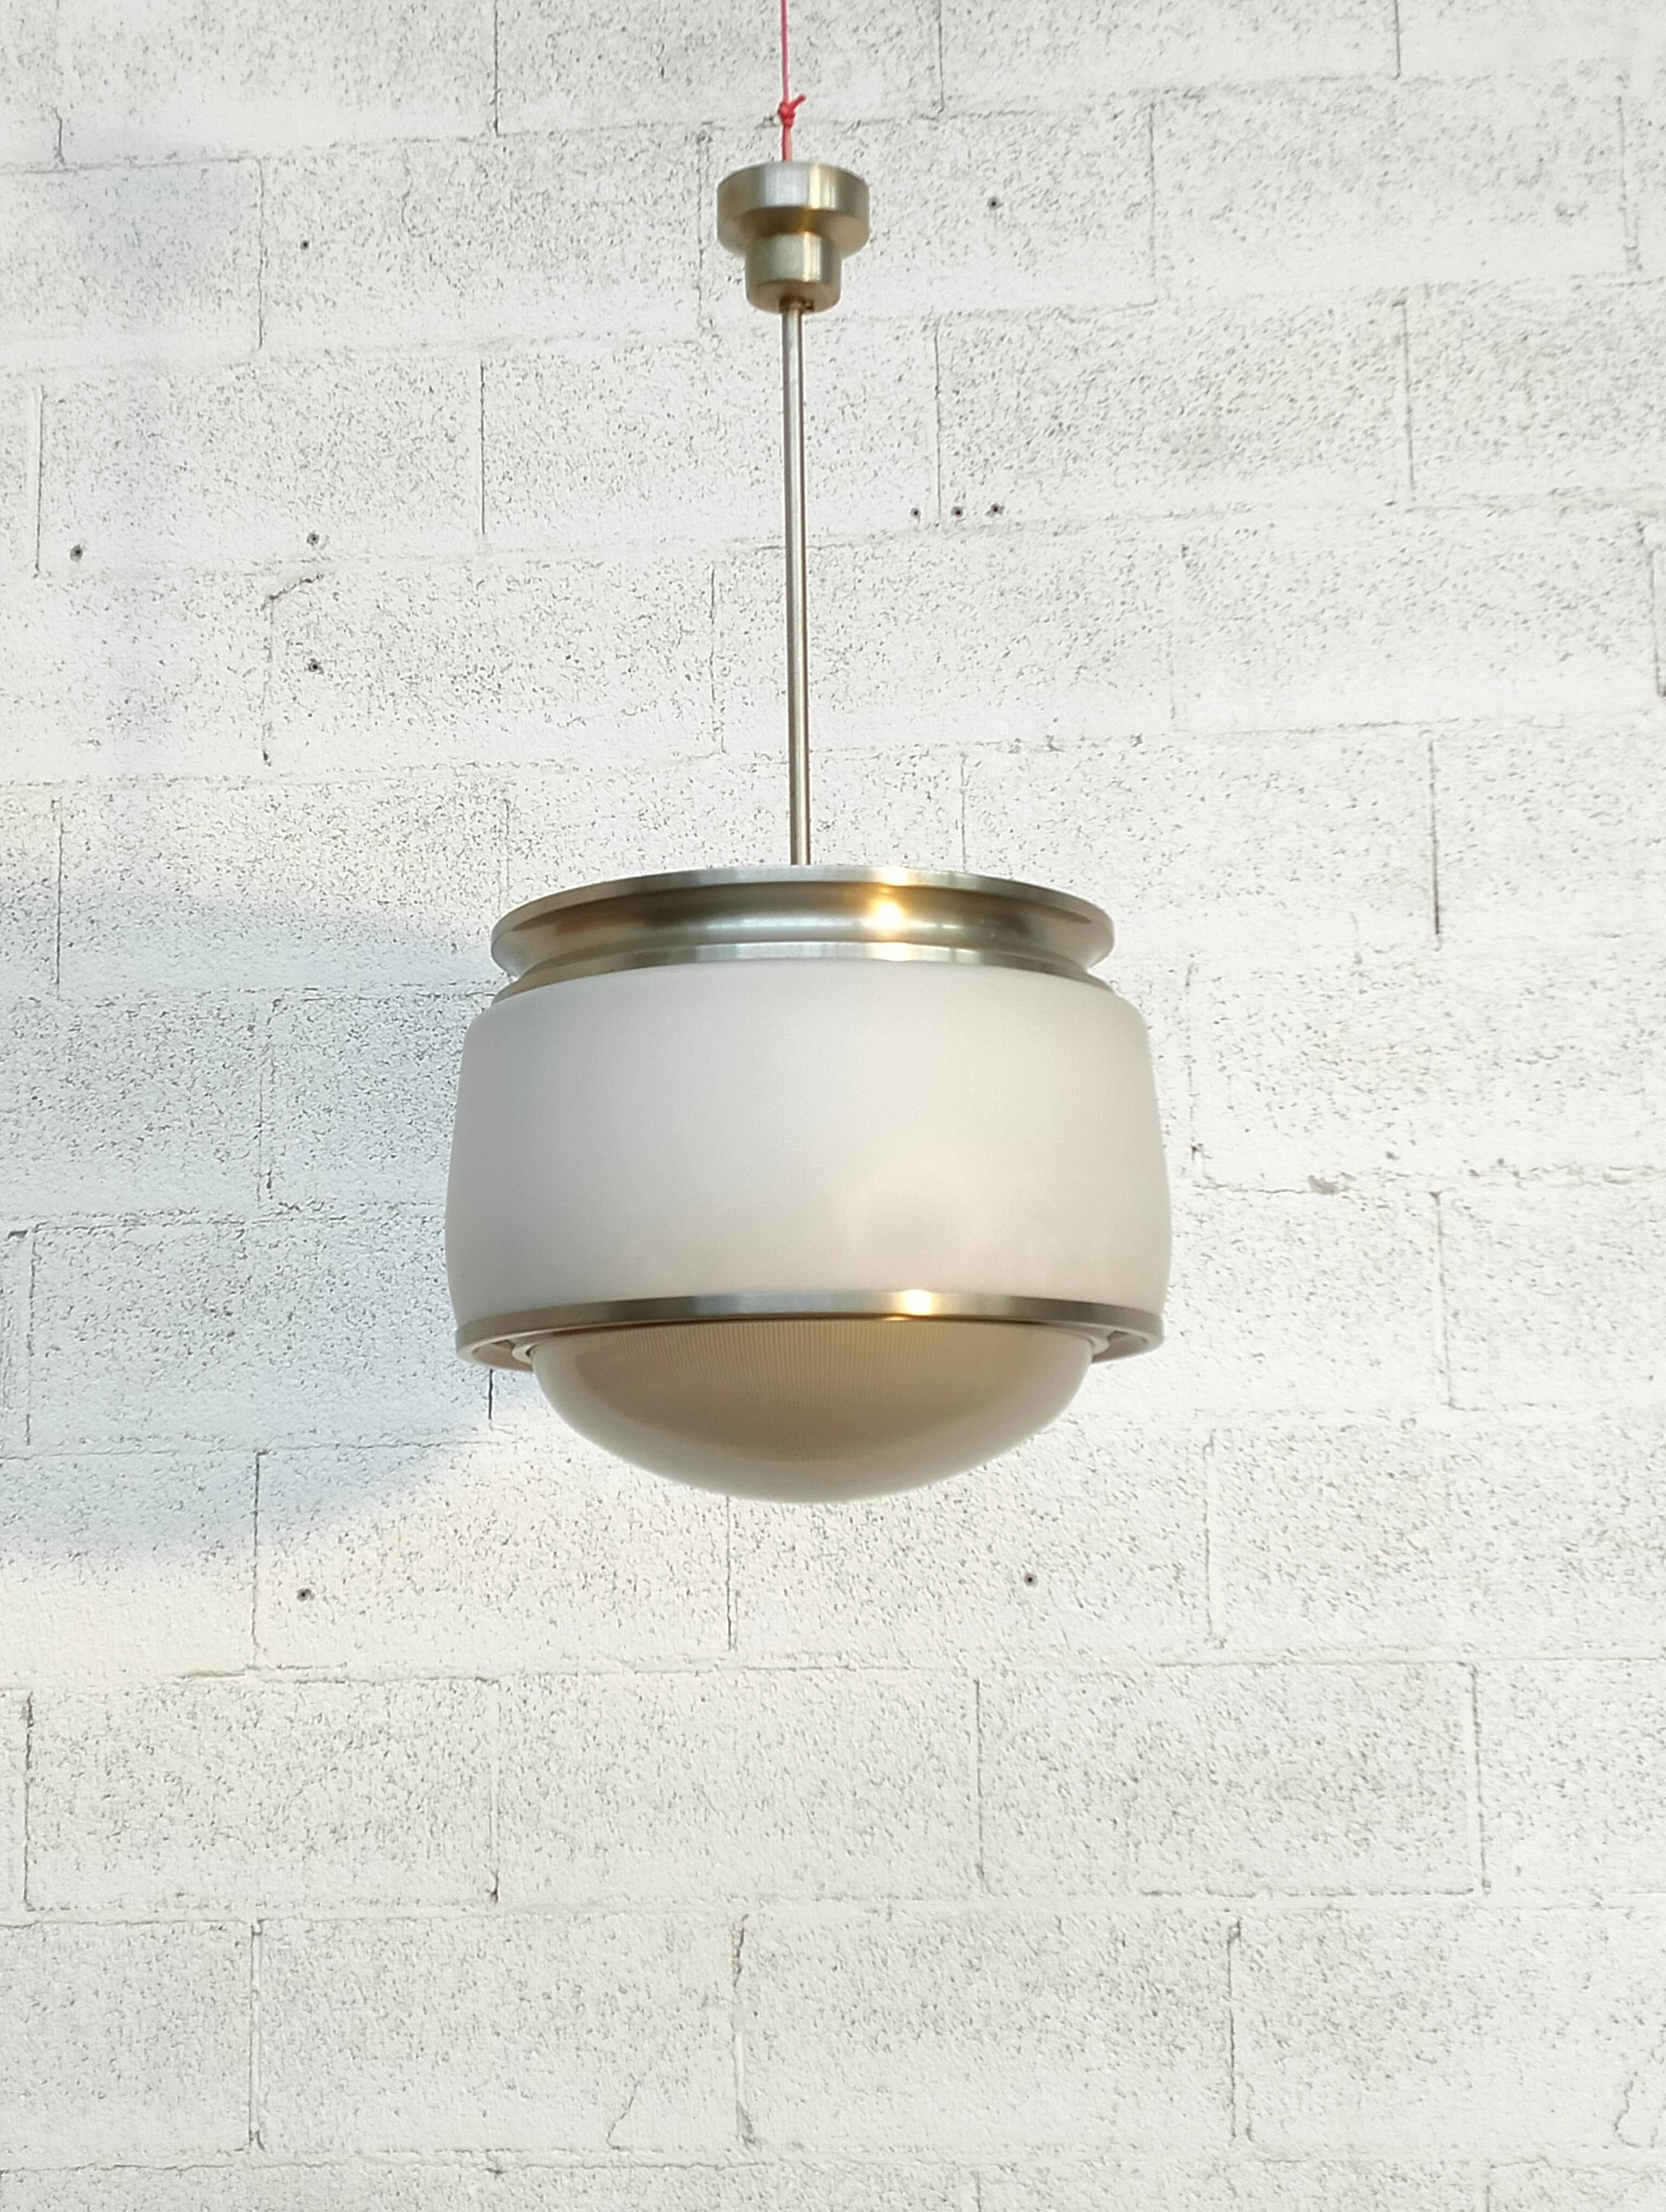 Mid-Century Modern Glass Pendant Lamp “Kappa” Model by Sergio Mazza for Artemide 60s For Sale